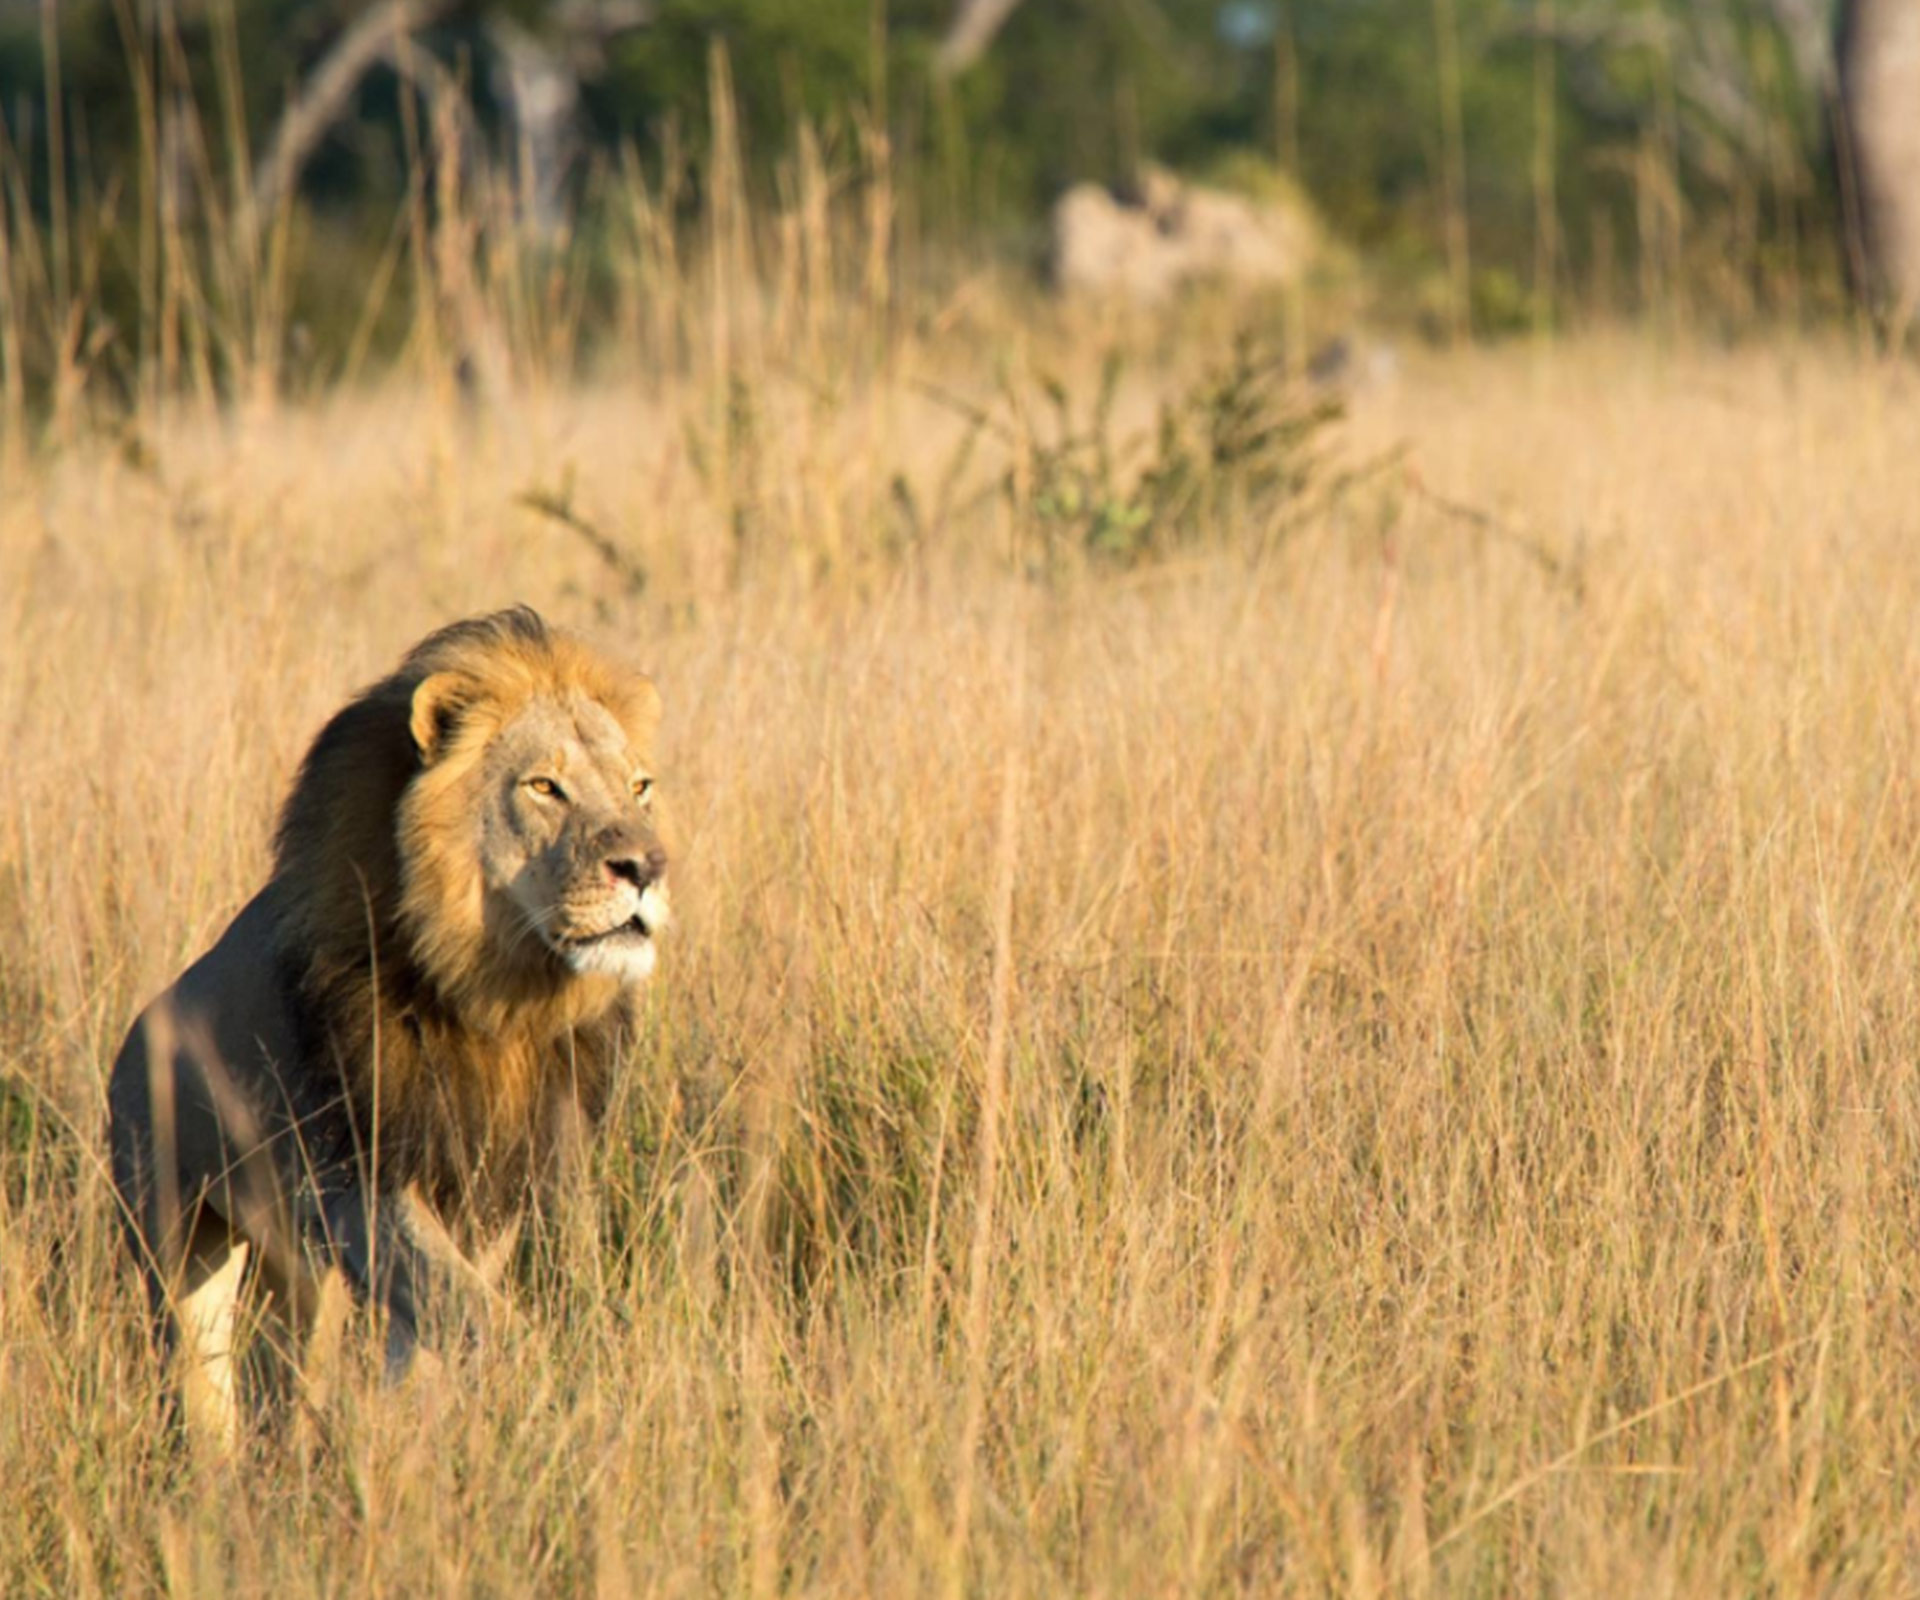 Cecil the Lion’s son Xanda has been shot and killed by a trophy hunter in Zimbabwe